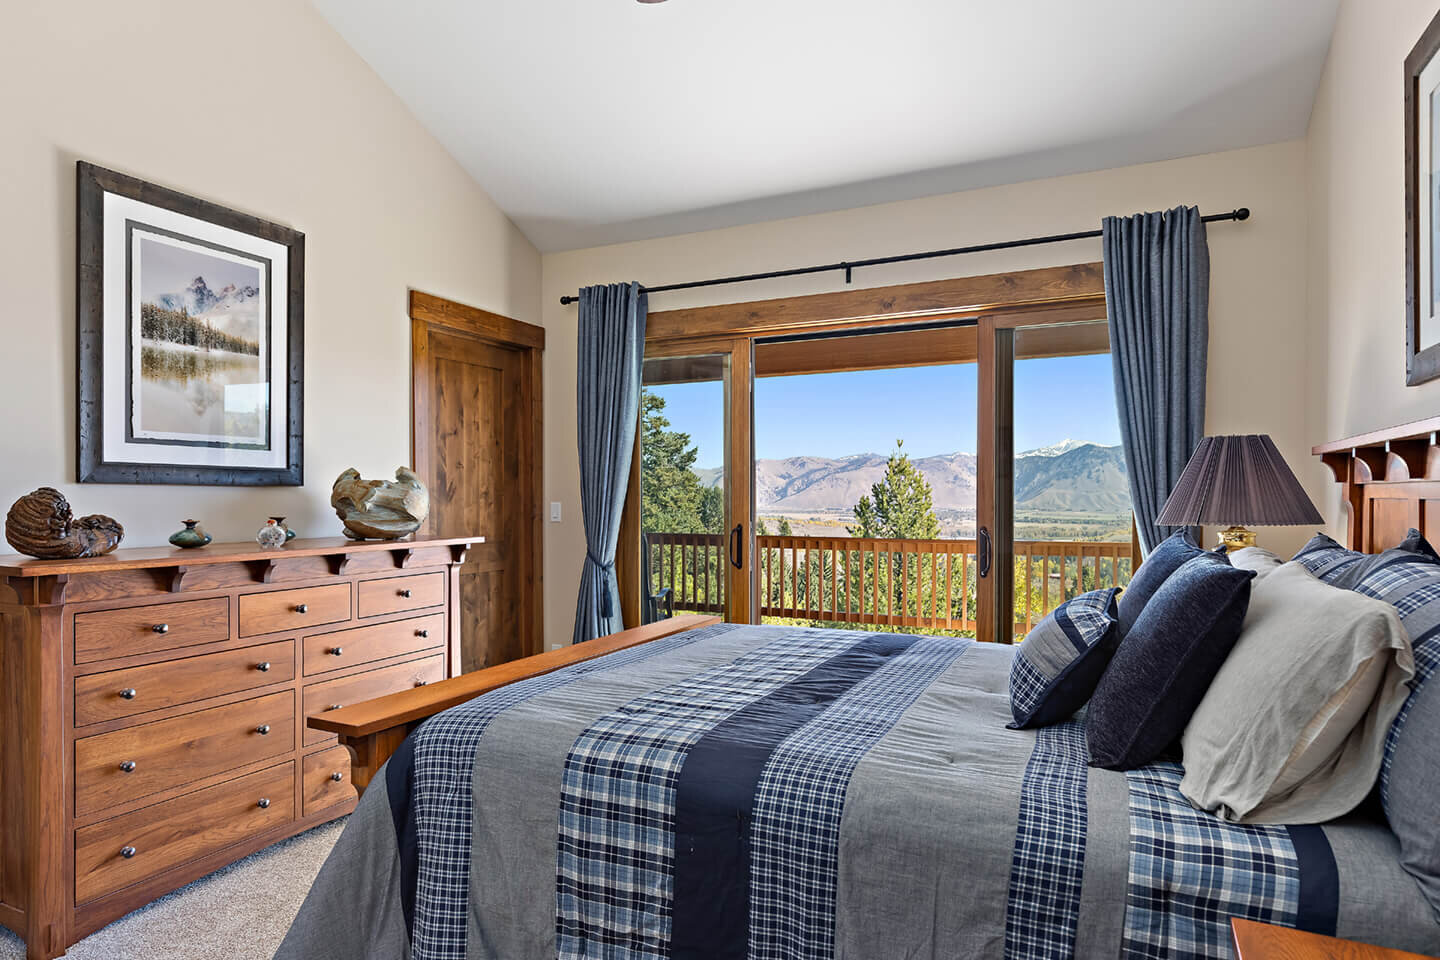 Master bedroom with view towards hills